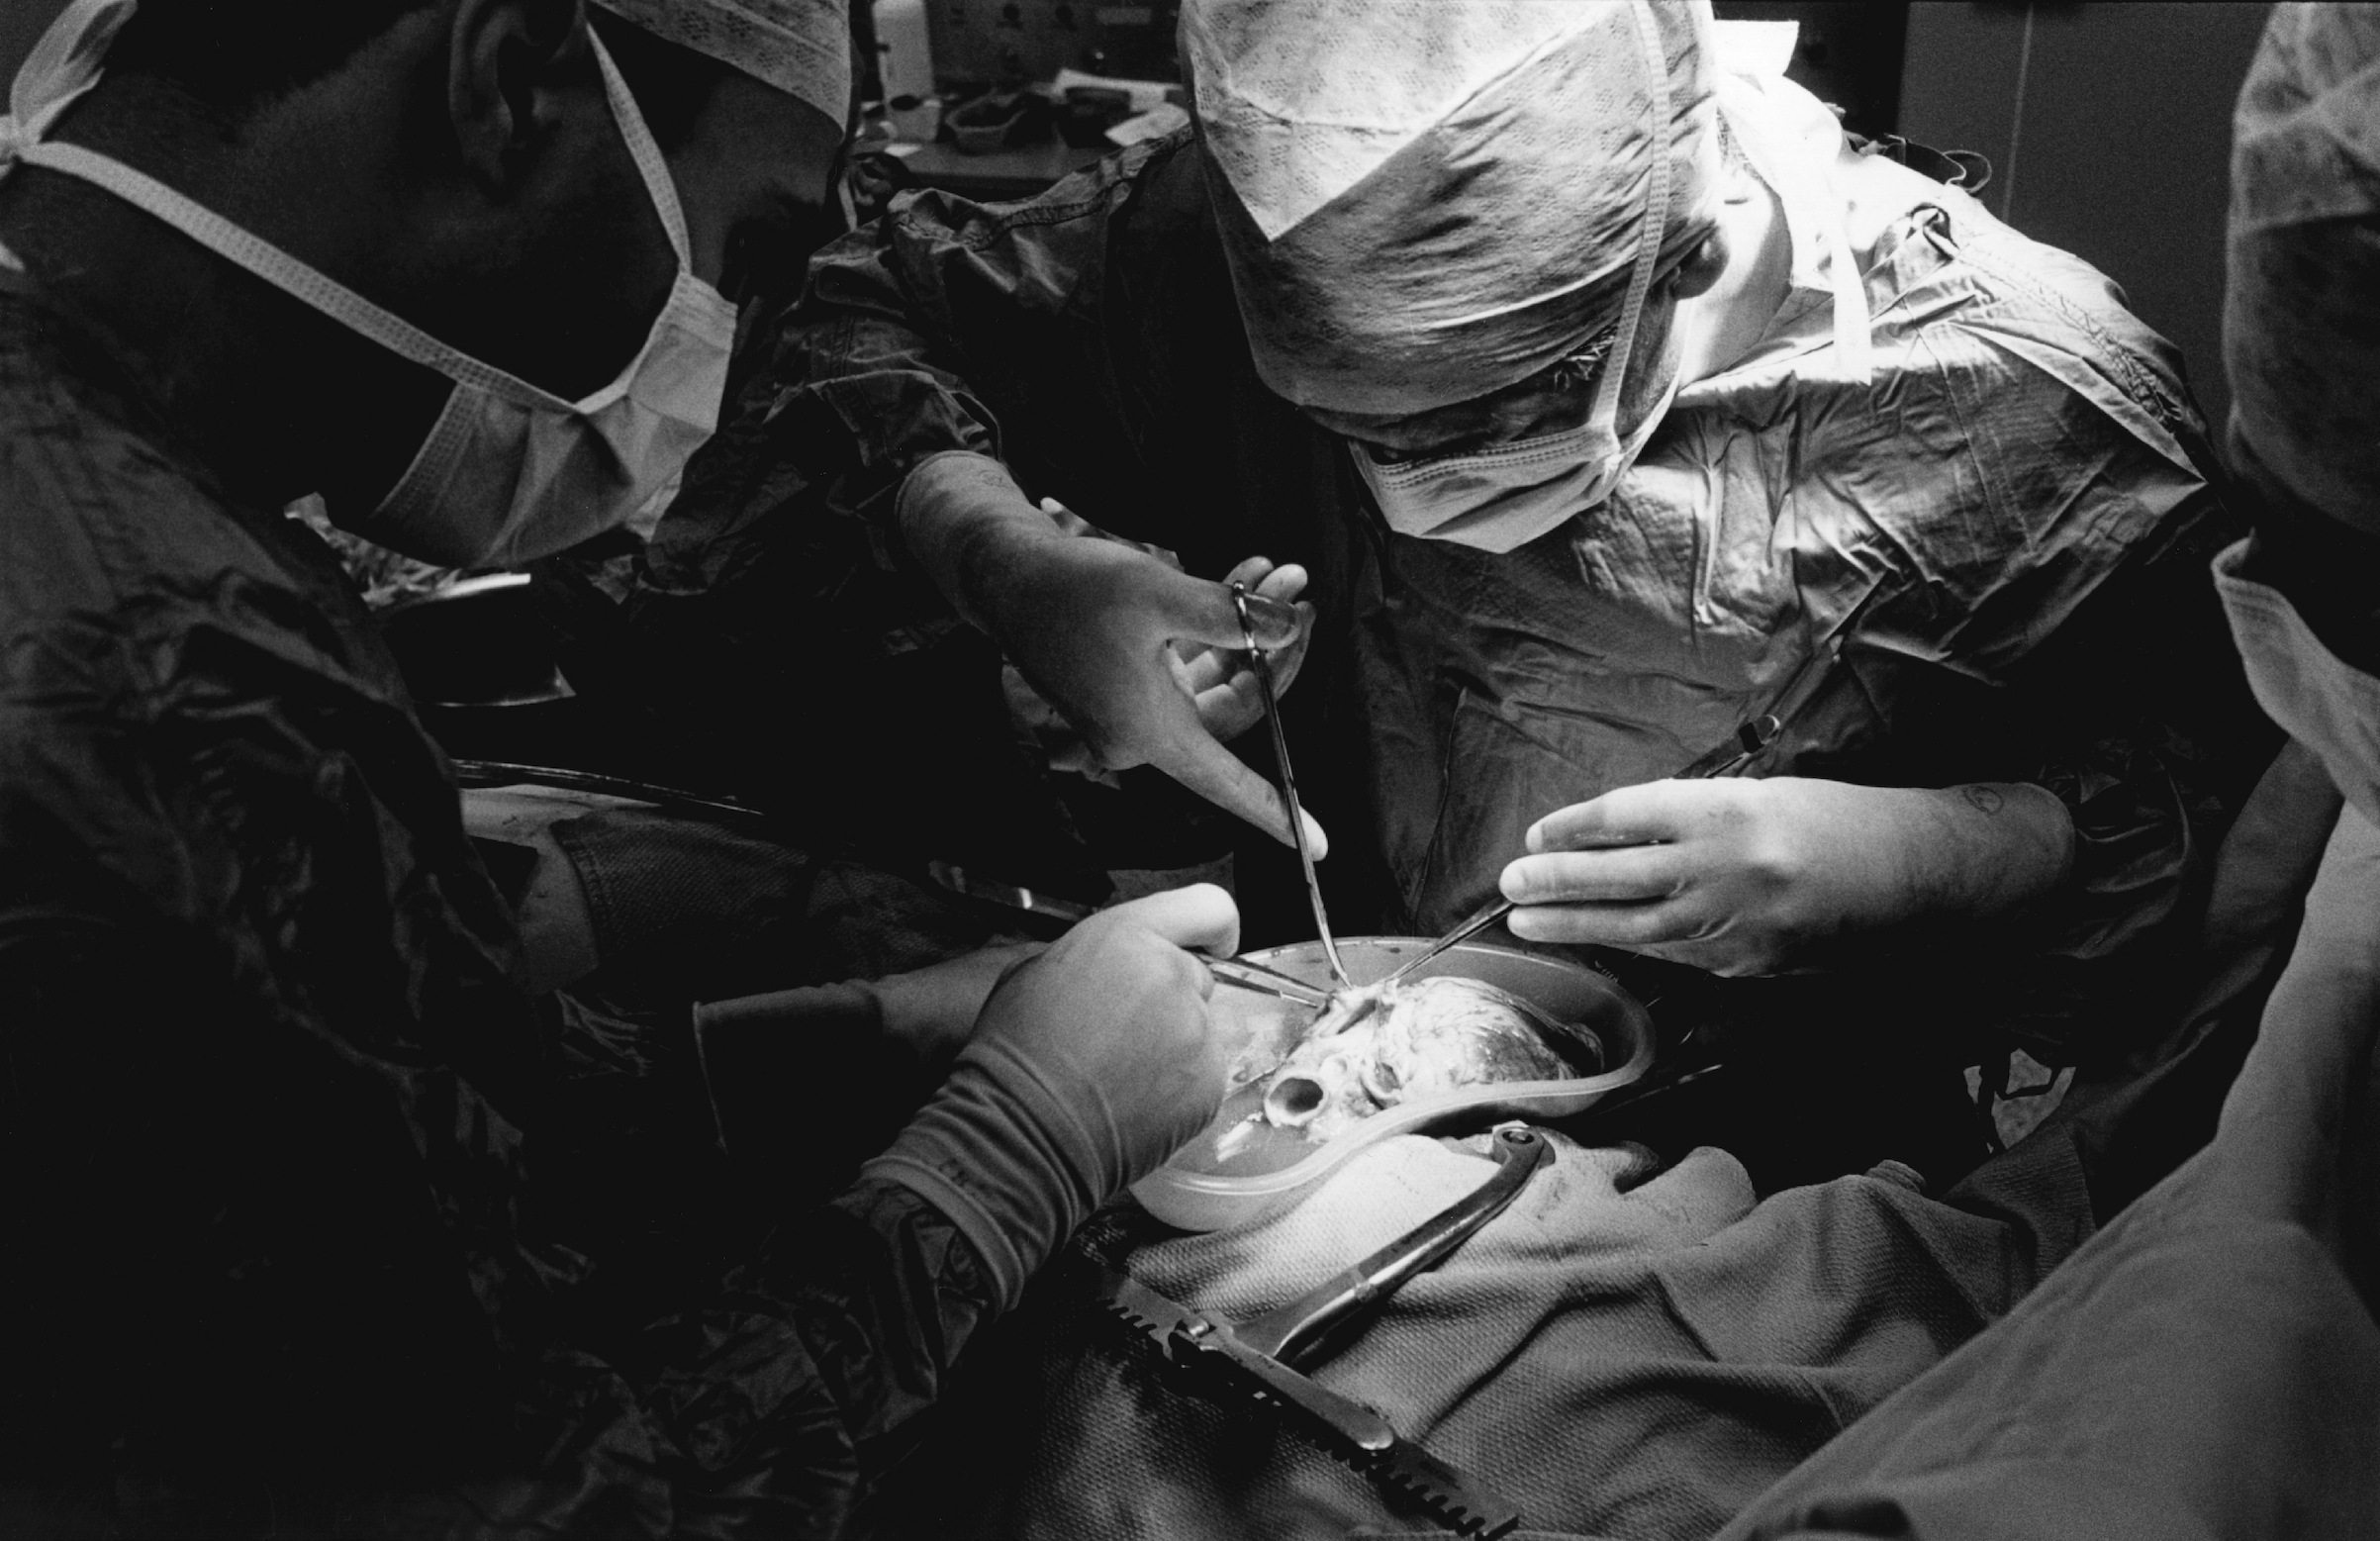 Undated photo of a heart transplant operation (Corbis via Getty Images)